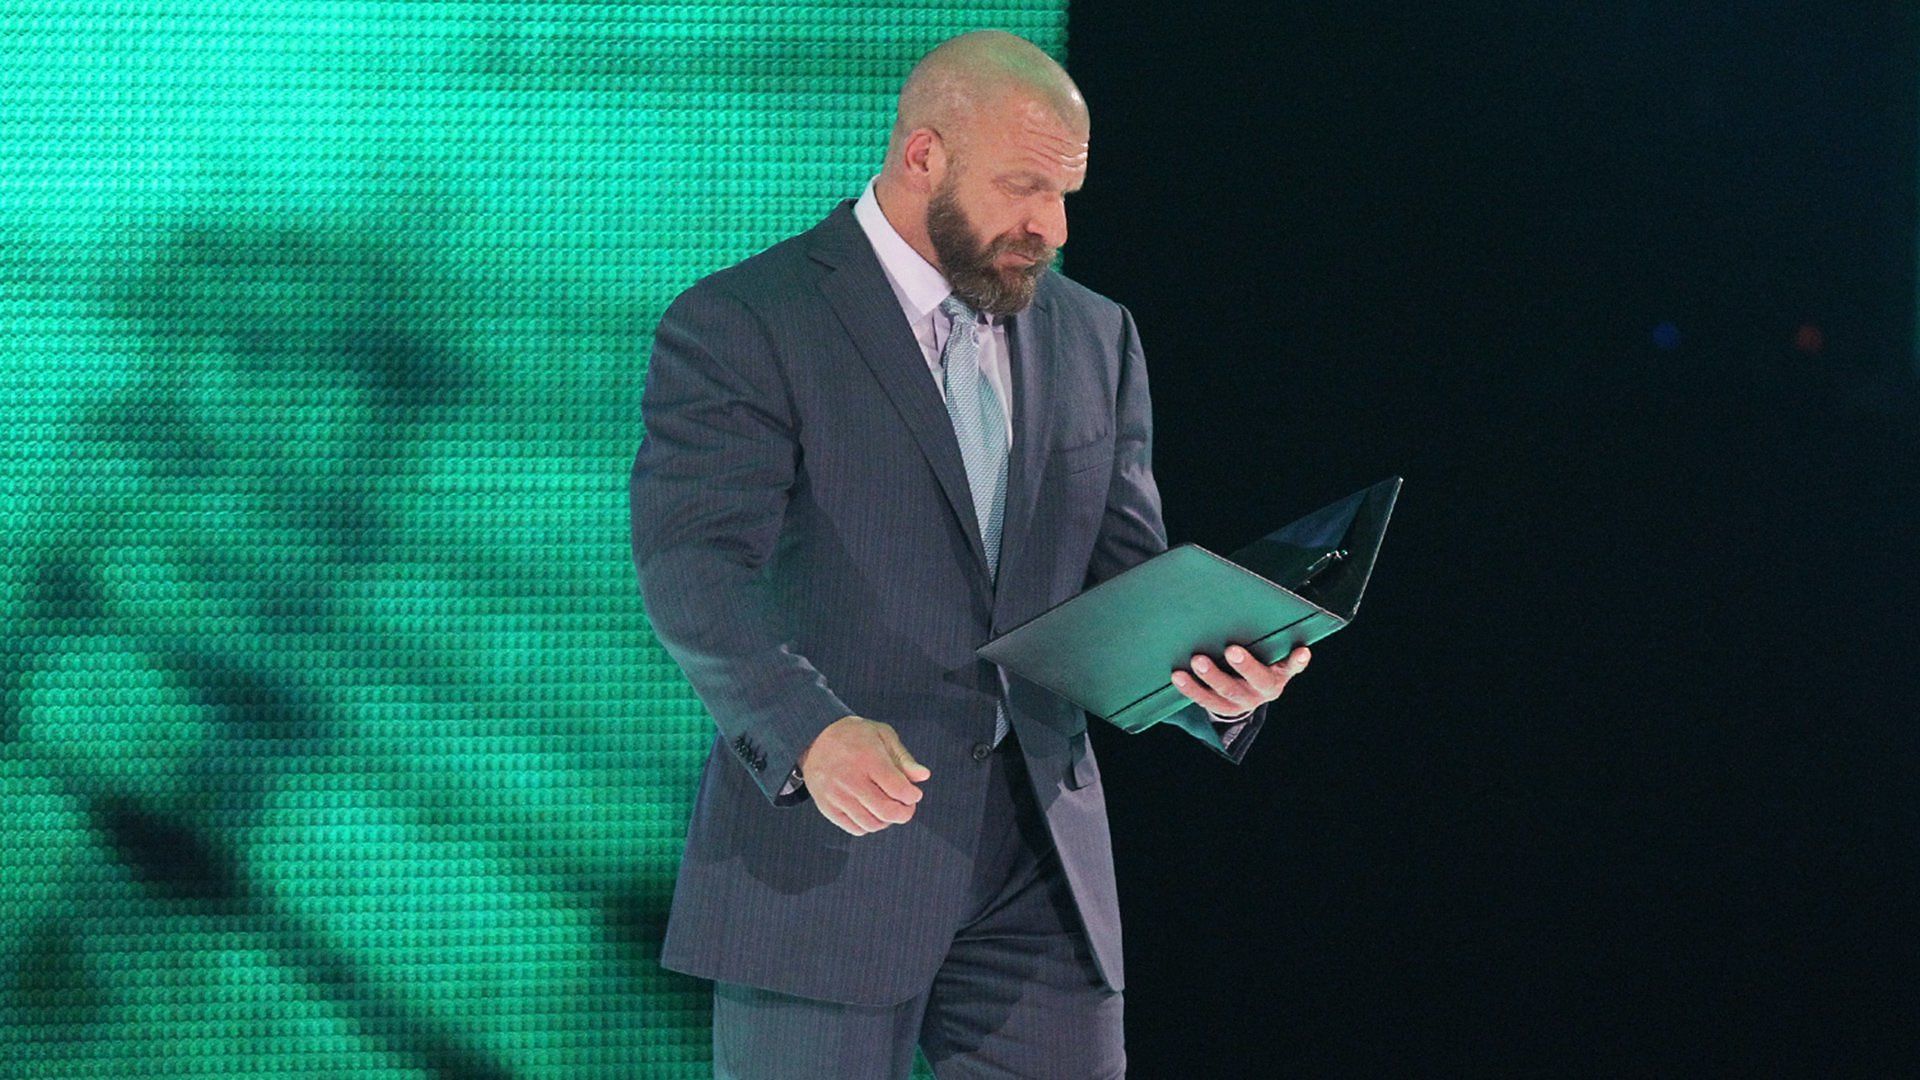 WWE Chief Content Officer Triple H looks over a contract